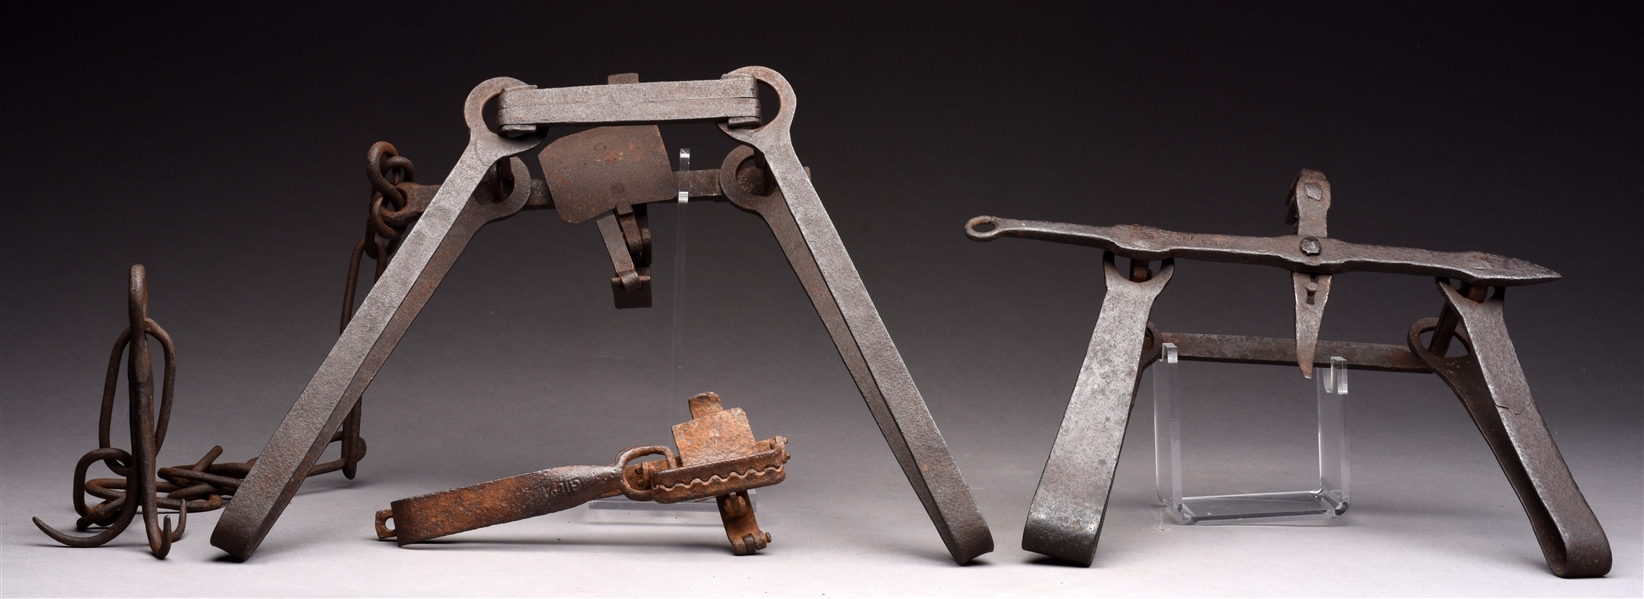 LOT OF 3 EARLY ANIMAL TRAPS:  ONE DATED 1755, ONE MARKED "GILPA", ANOTHER 18TH CENTURY.